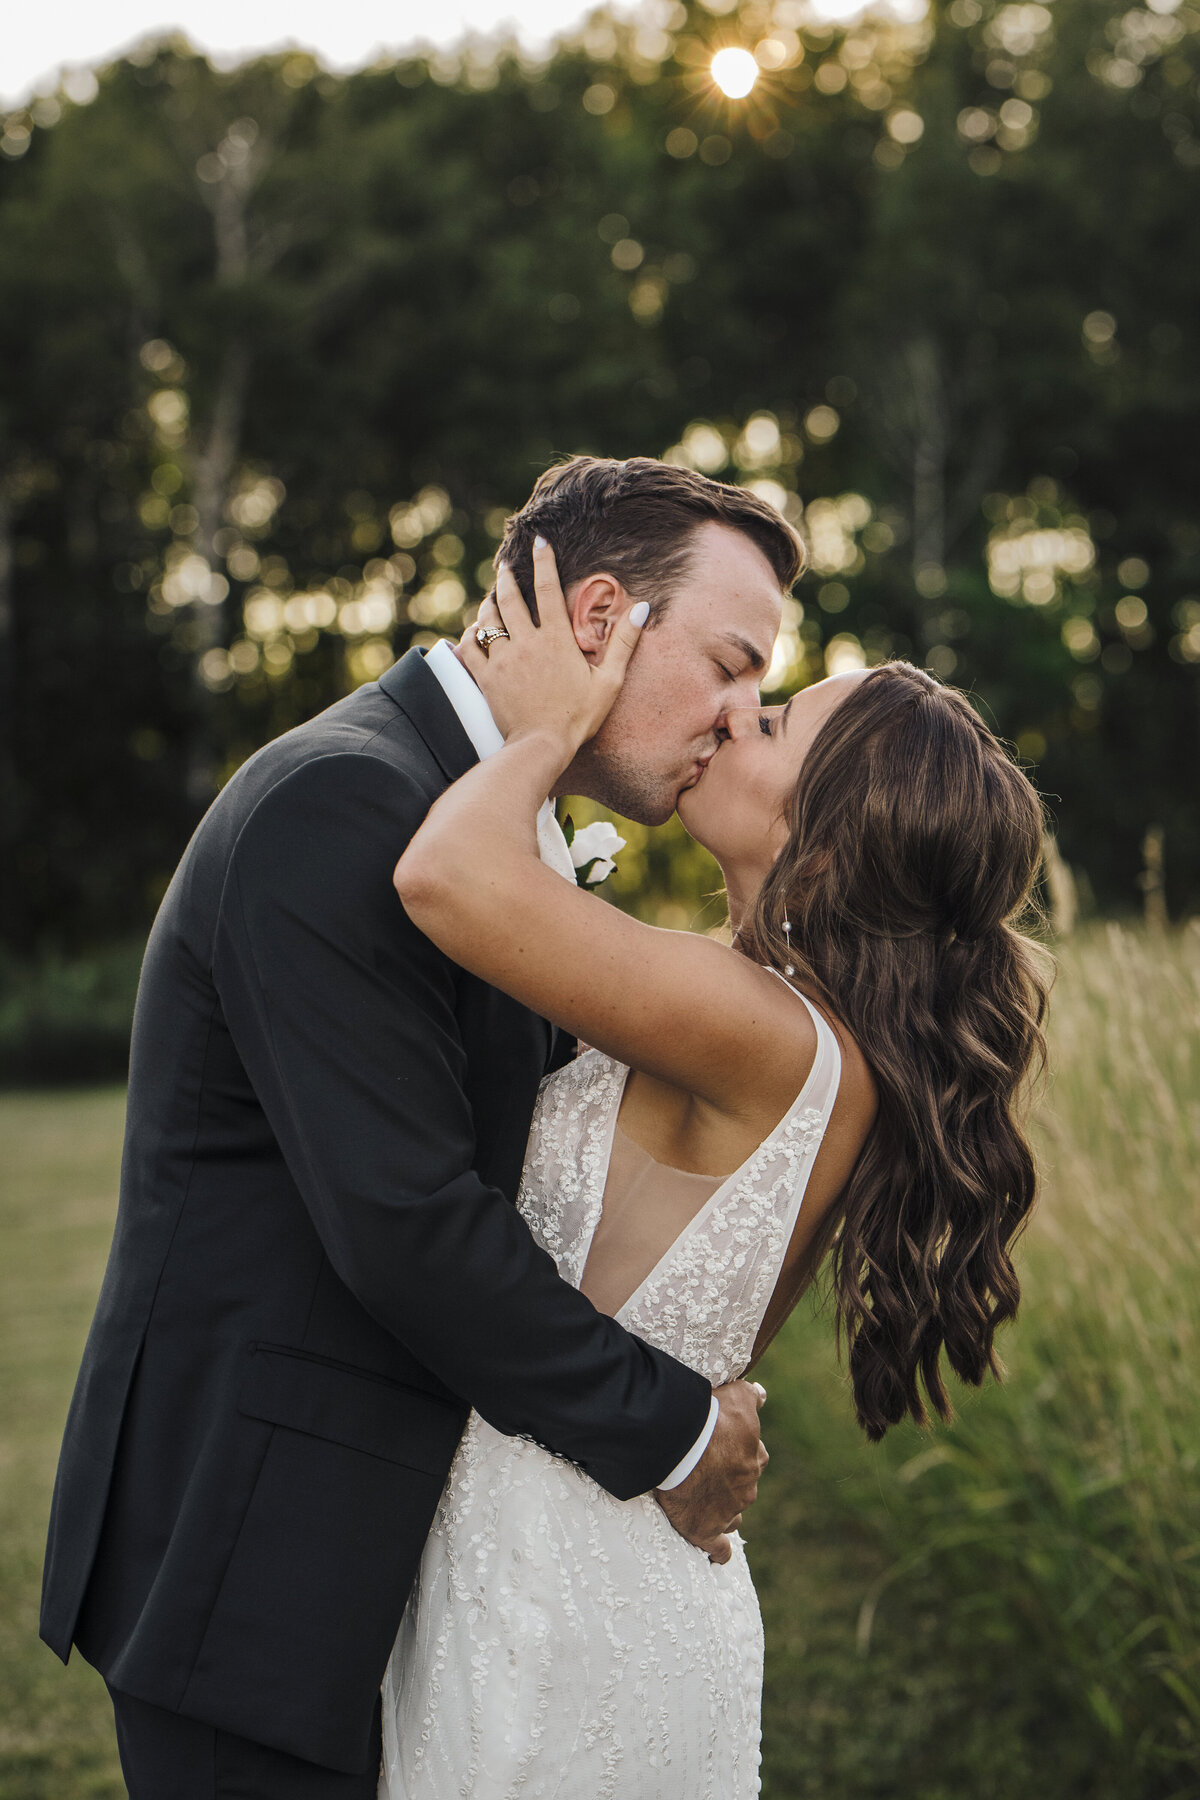 A tender moment captured as a couple in wedding attire share a passionate kiss, surrounded by the tranquility of nature with the soft glow of sunset in the background taken by jen Jarmuzek photography a Minneapolis wedding photographer